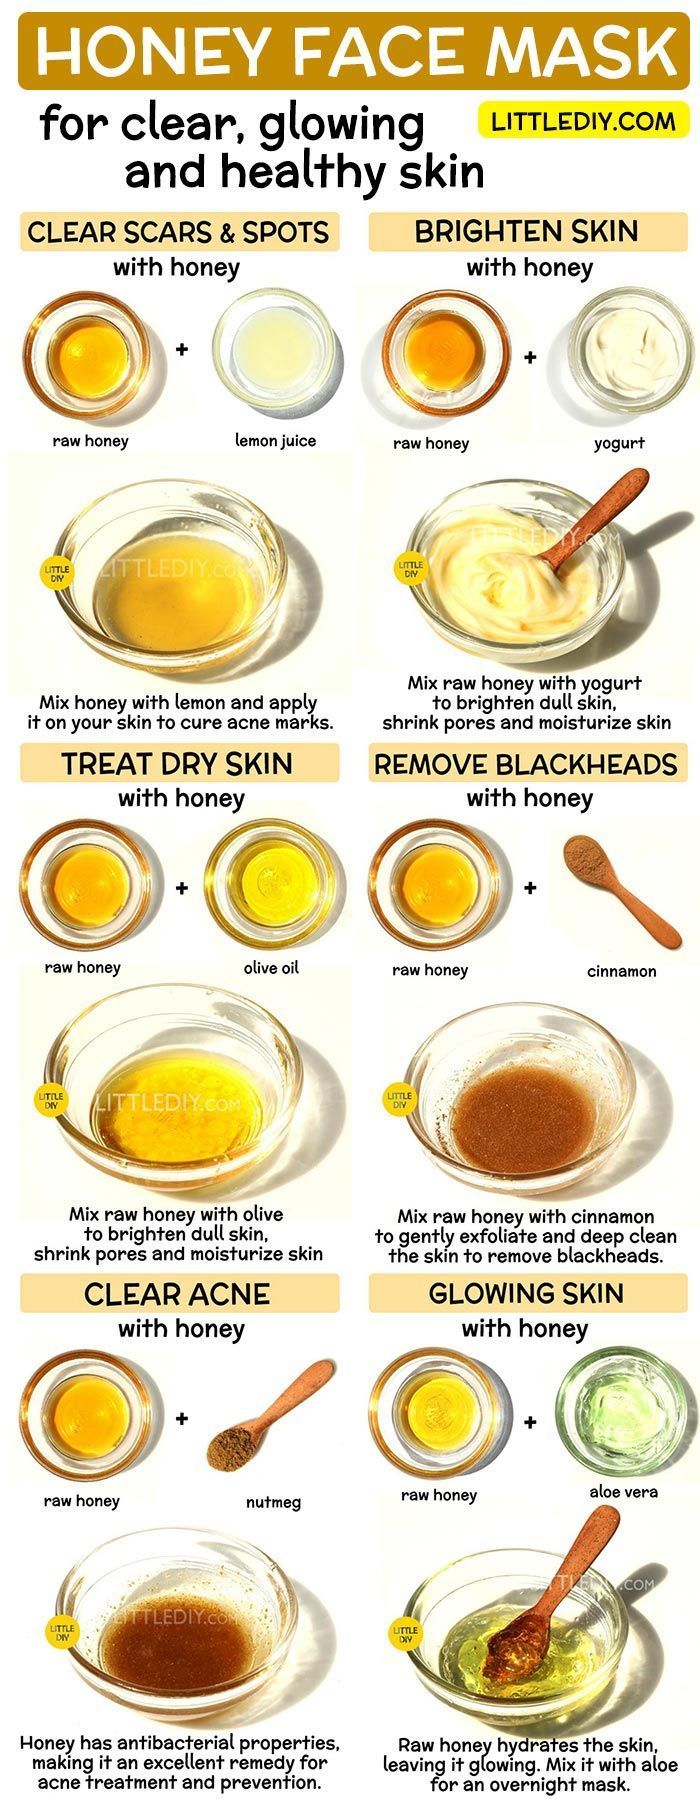 HONEY FACE MASKS for clear, bright and glowing skin - LITTLE DIY - HONEY FACE MASKS for clear, bright and glowing skin - LITTLE DIY -   11 diy Face Mask honey ideas